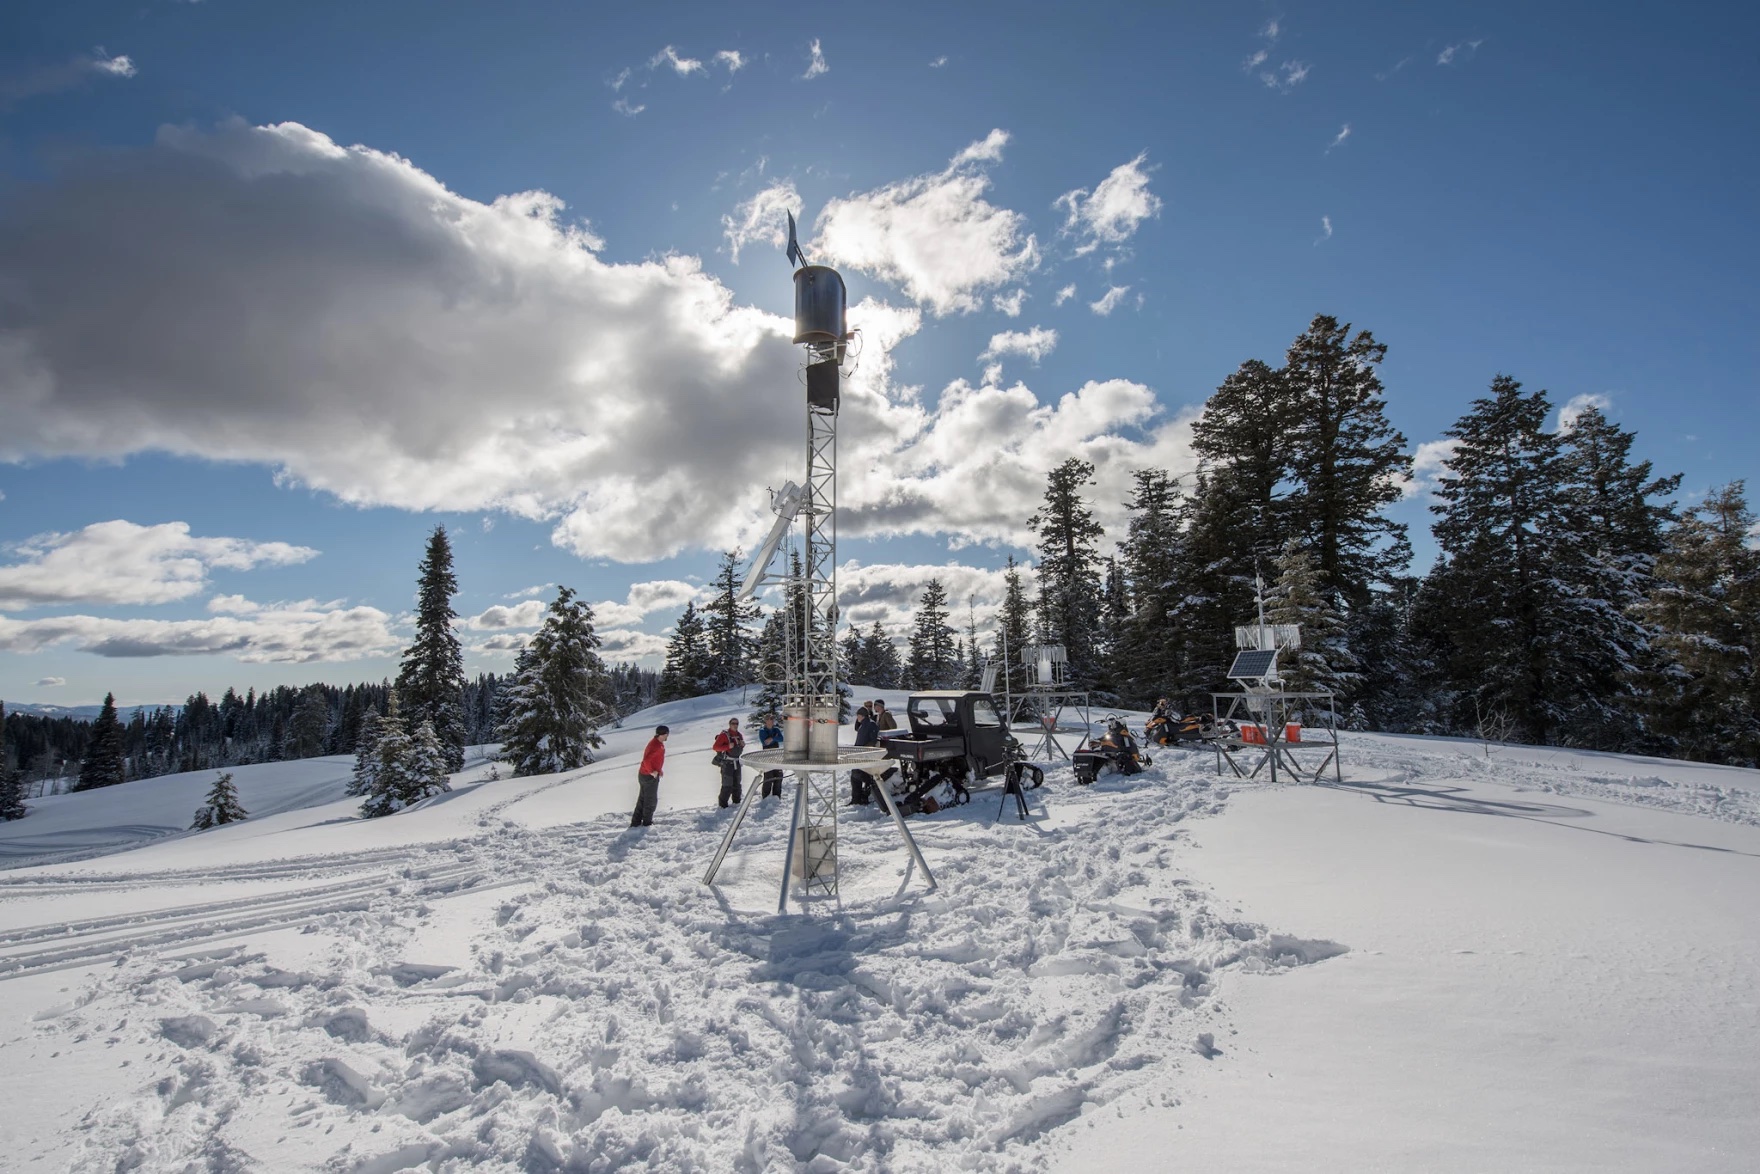 An antenna/metal structure that's about 20 feet high stands at the top of a snowy area.